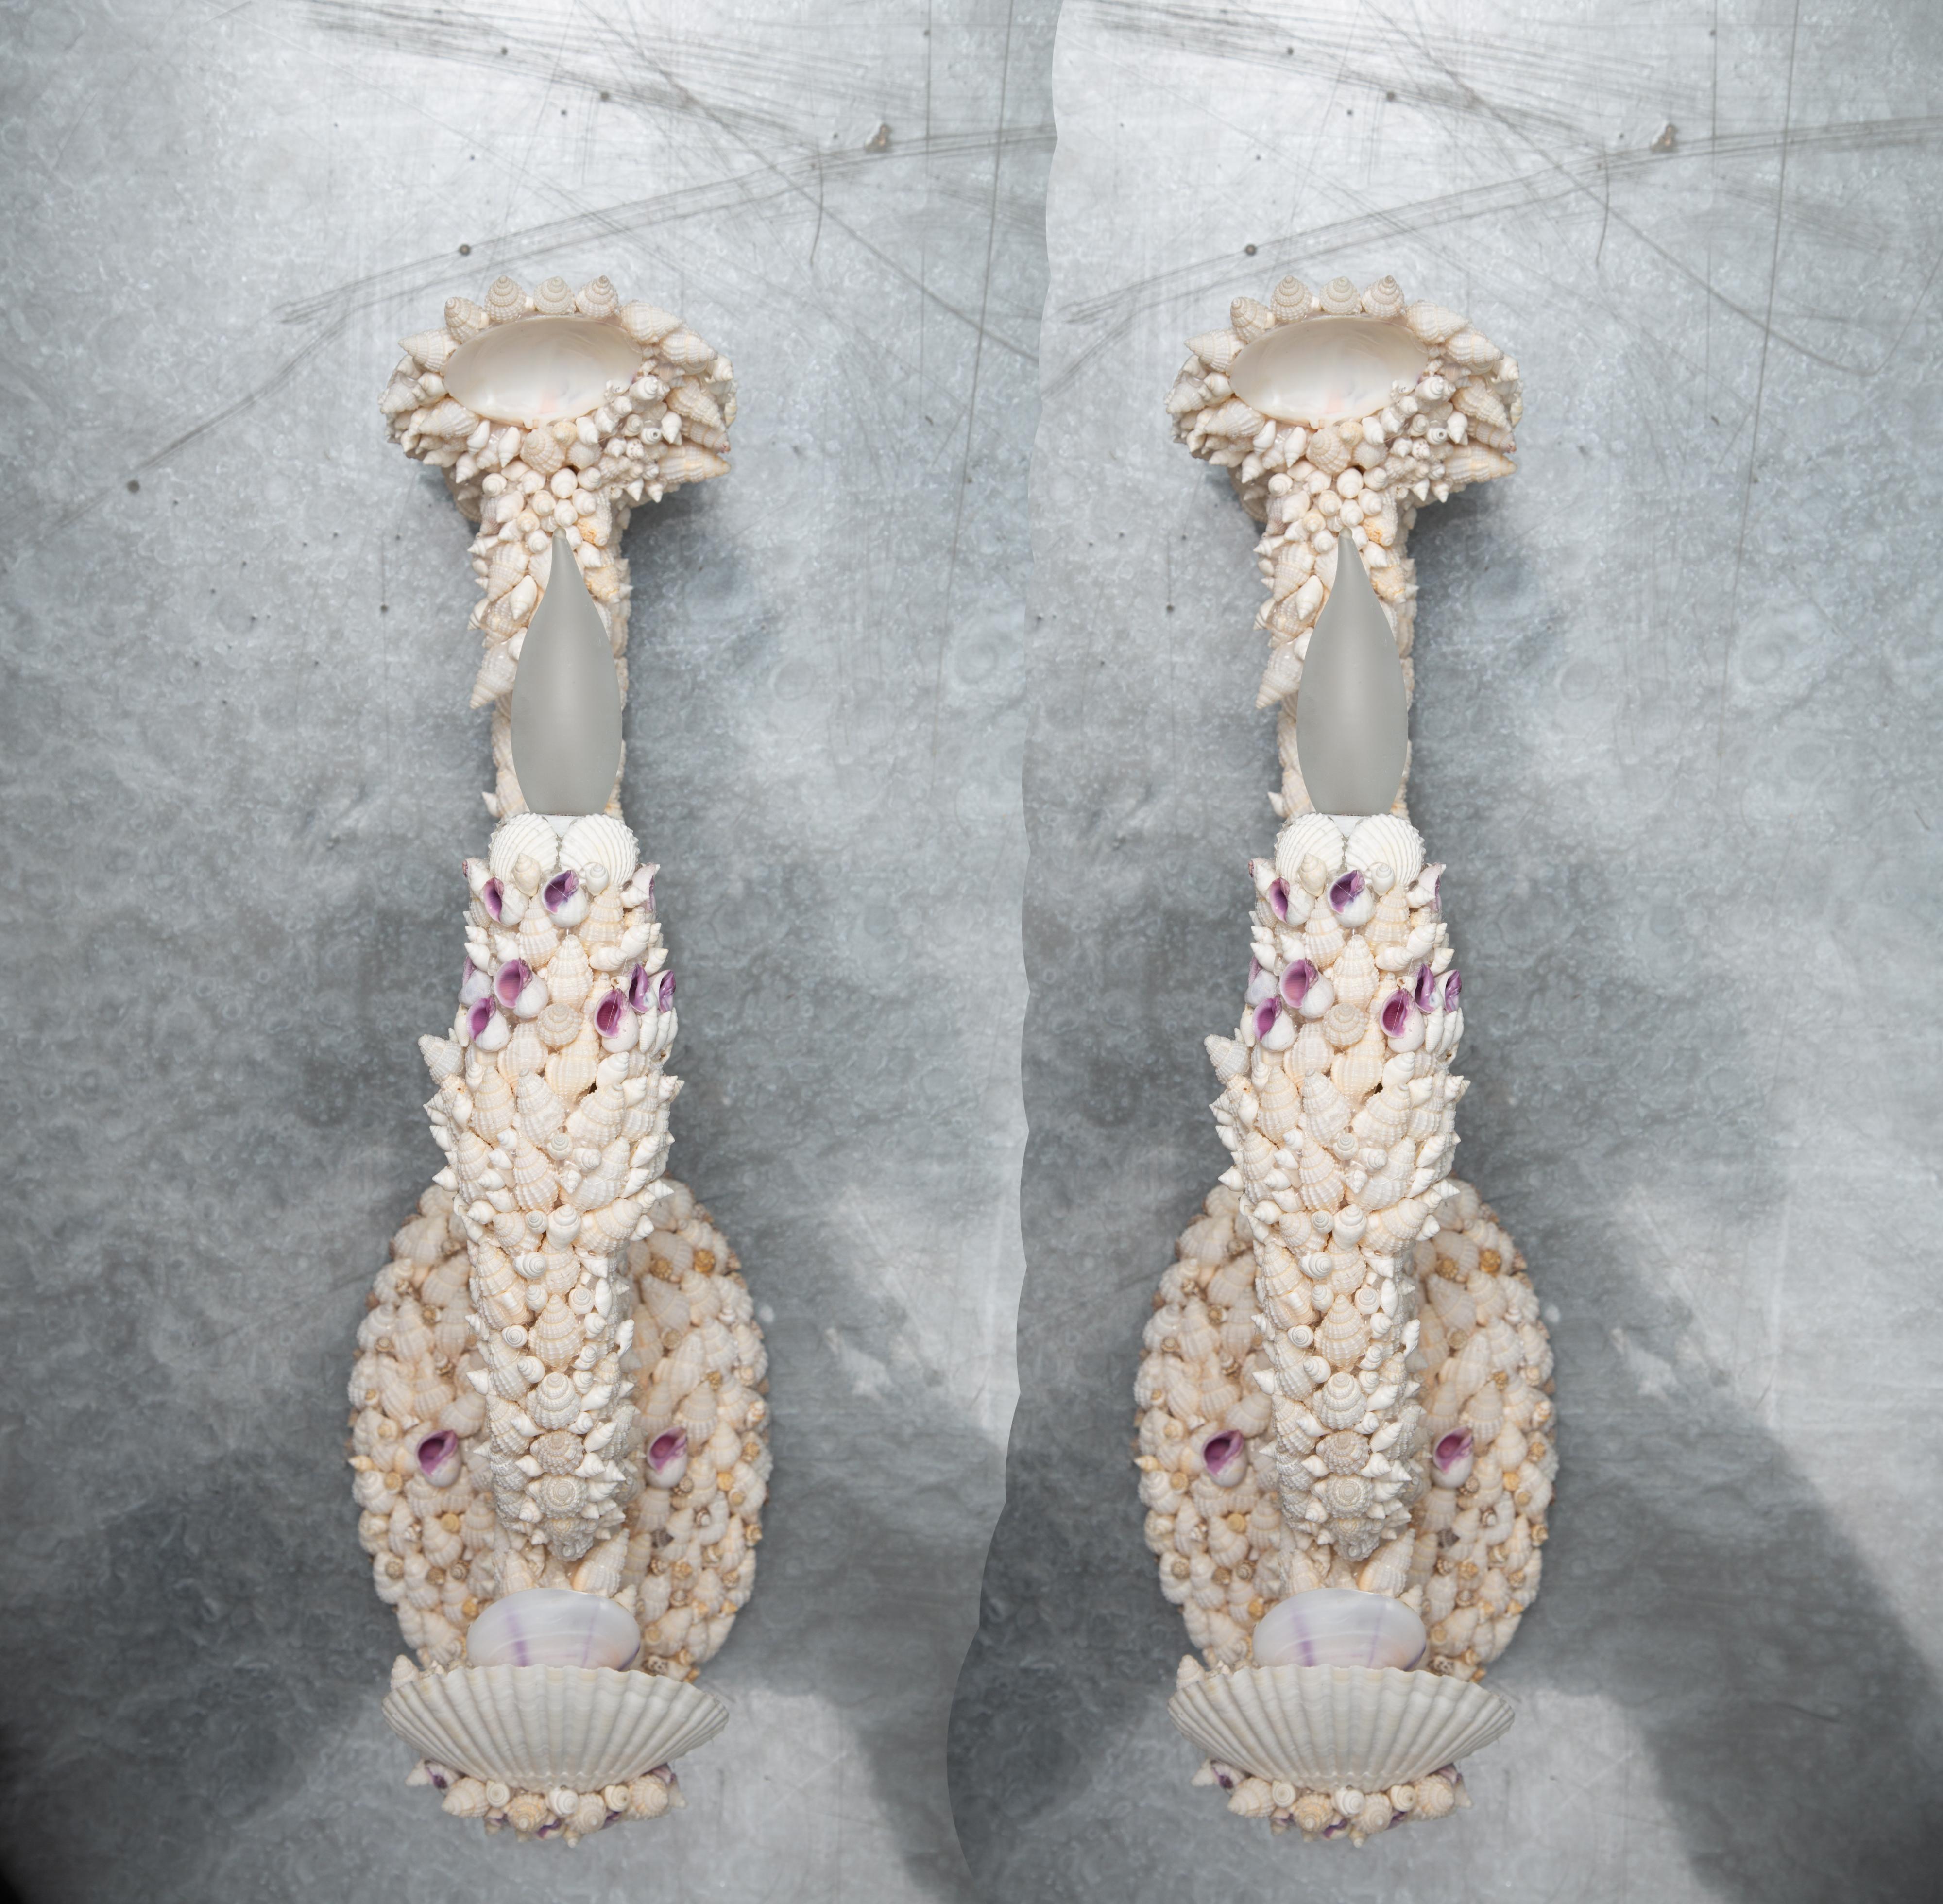 Pair of Shell Art Sconces 2